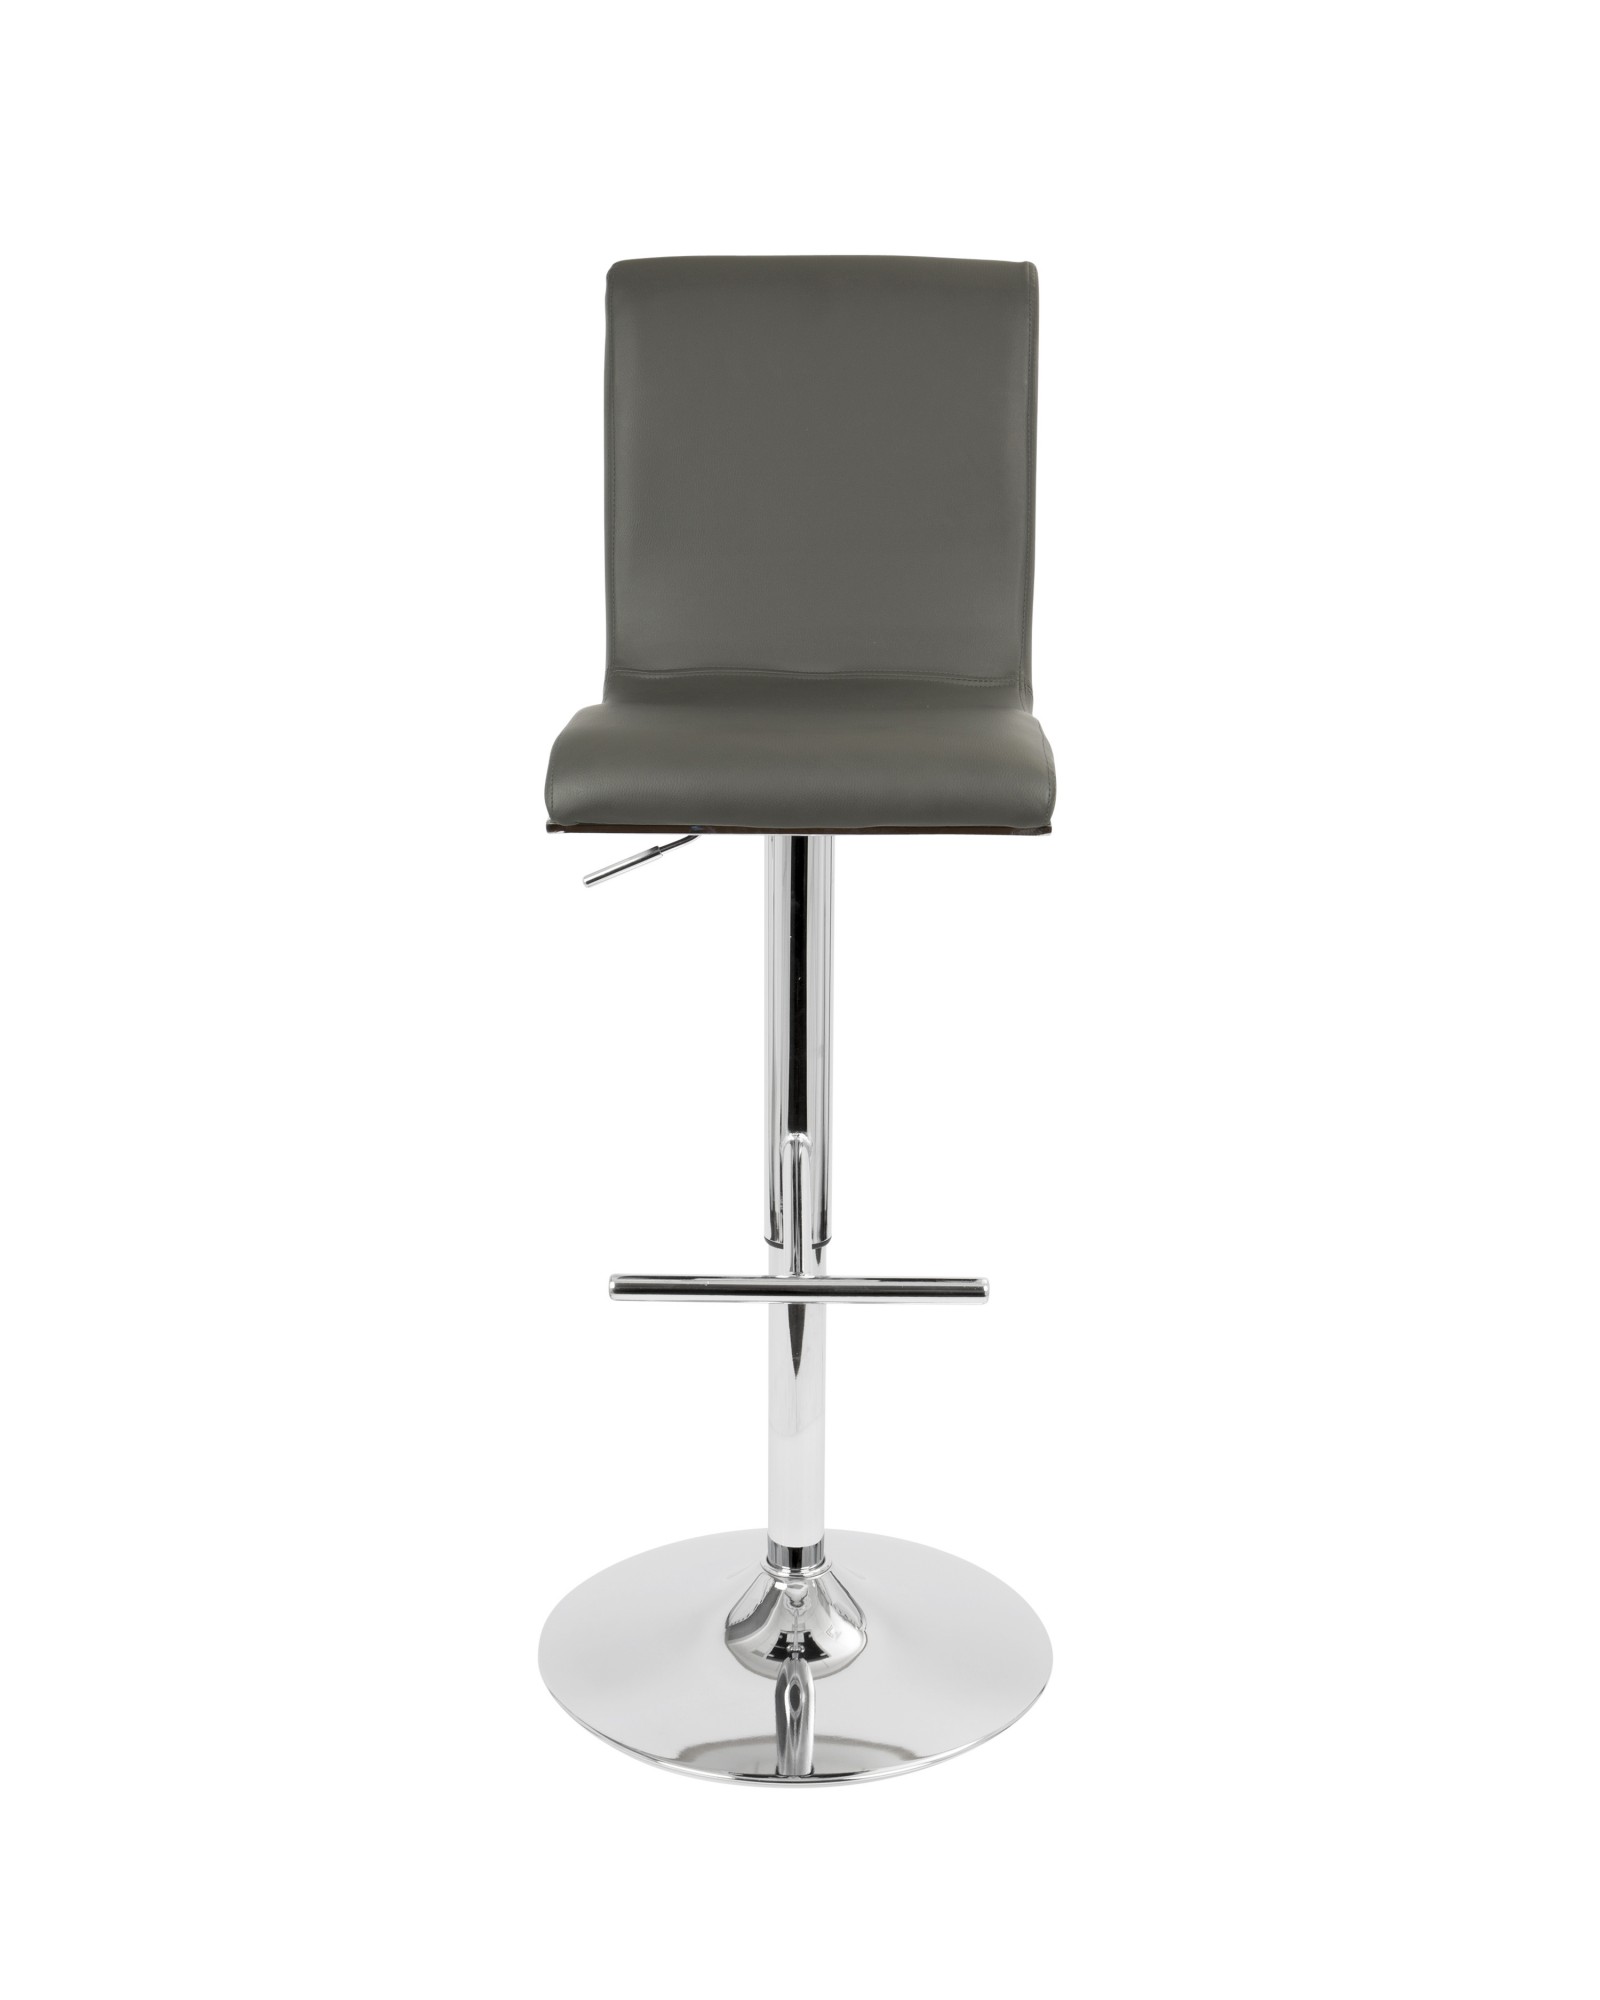 Spago Contemporary Adjustable Barstool with Swivel in Grey Faux Leather